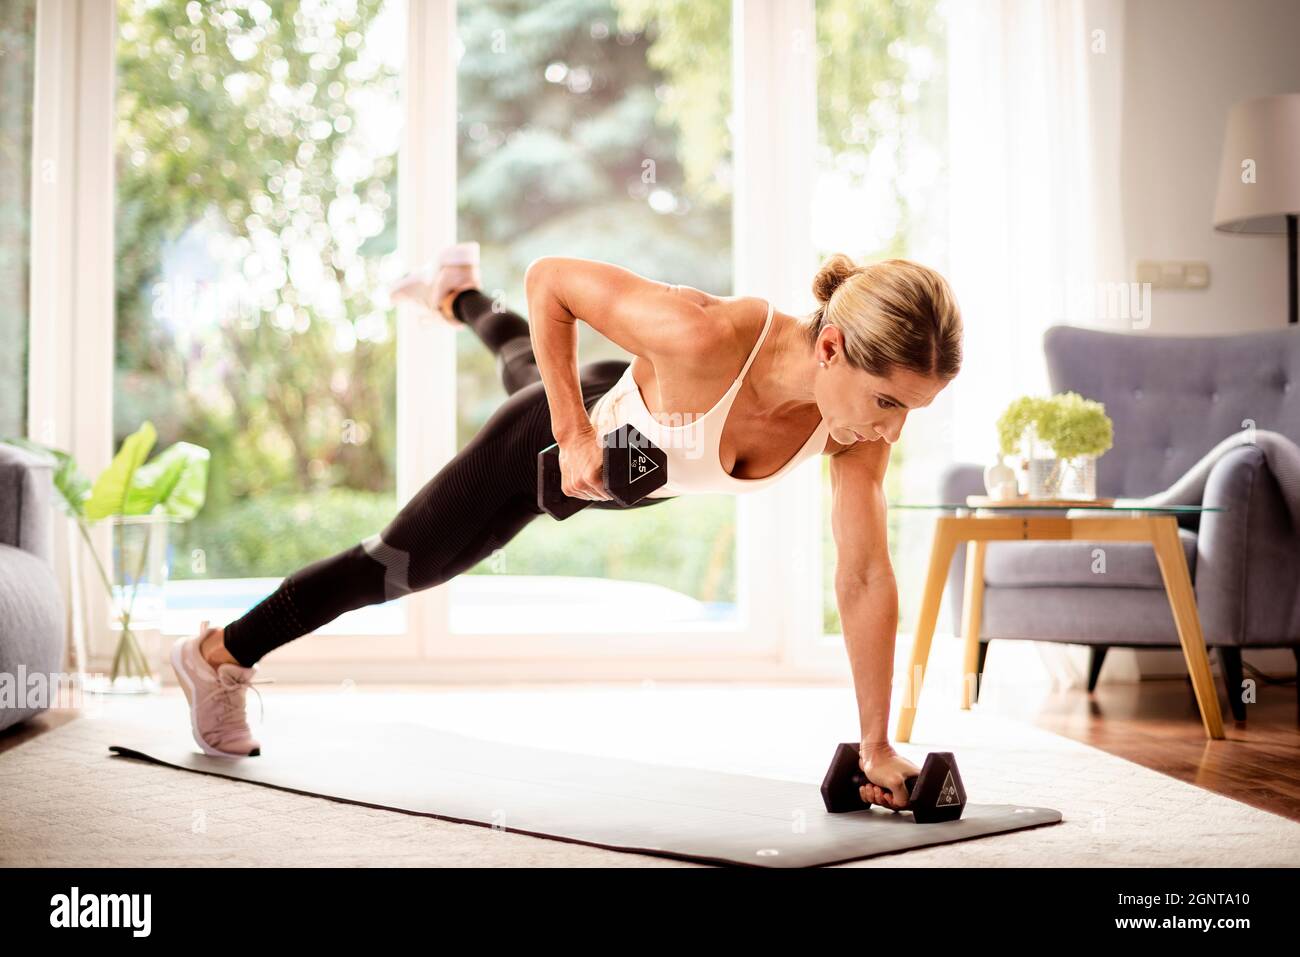 Shot of a woman using dumbbells while doing body workout at home. Woman  wearing sports wear while exercising on the yoga mat. Healthy lifestyle  Stock Photo - Alamy